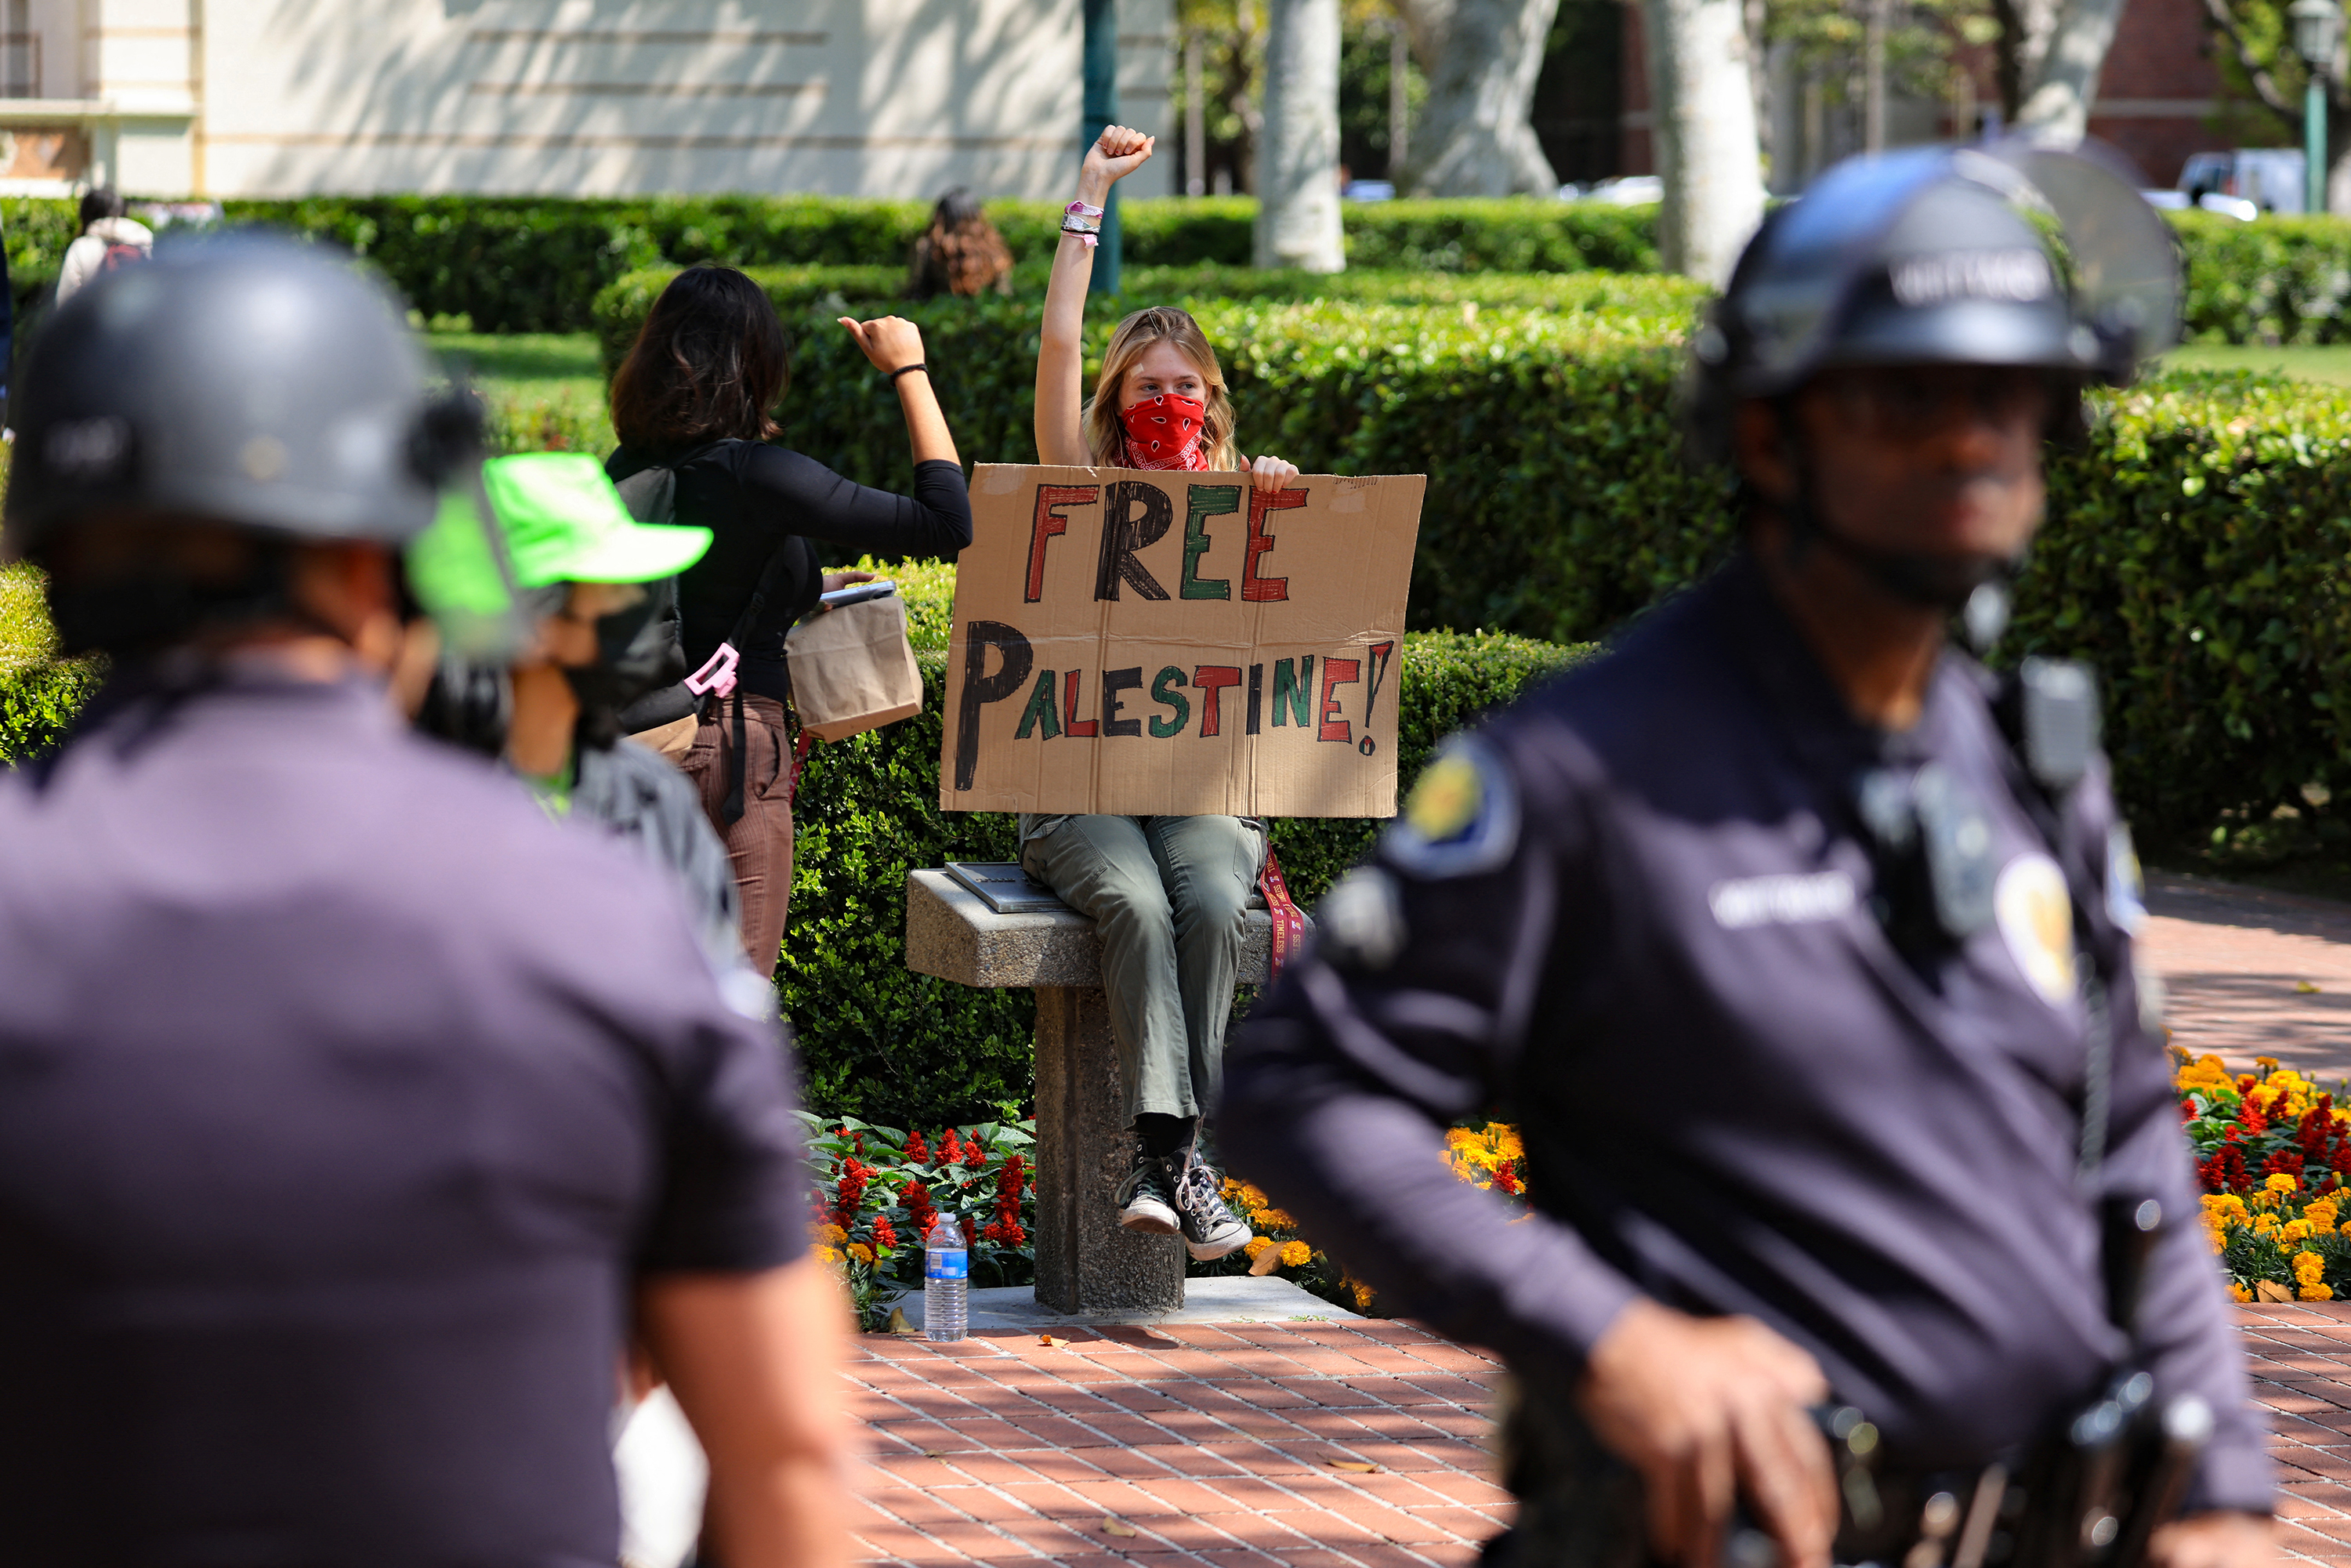 A demonstrator holding a sign holds up a fist after students built a protest encampment in support of Palestinians at the University of Southern California's Alumni Park on April 24, in Los Angeles, California.